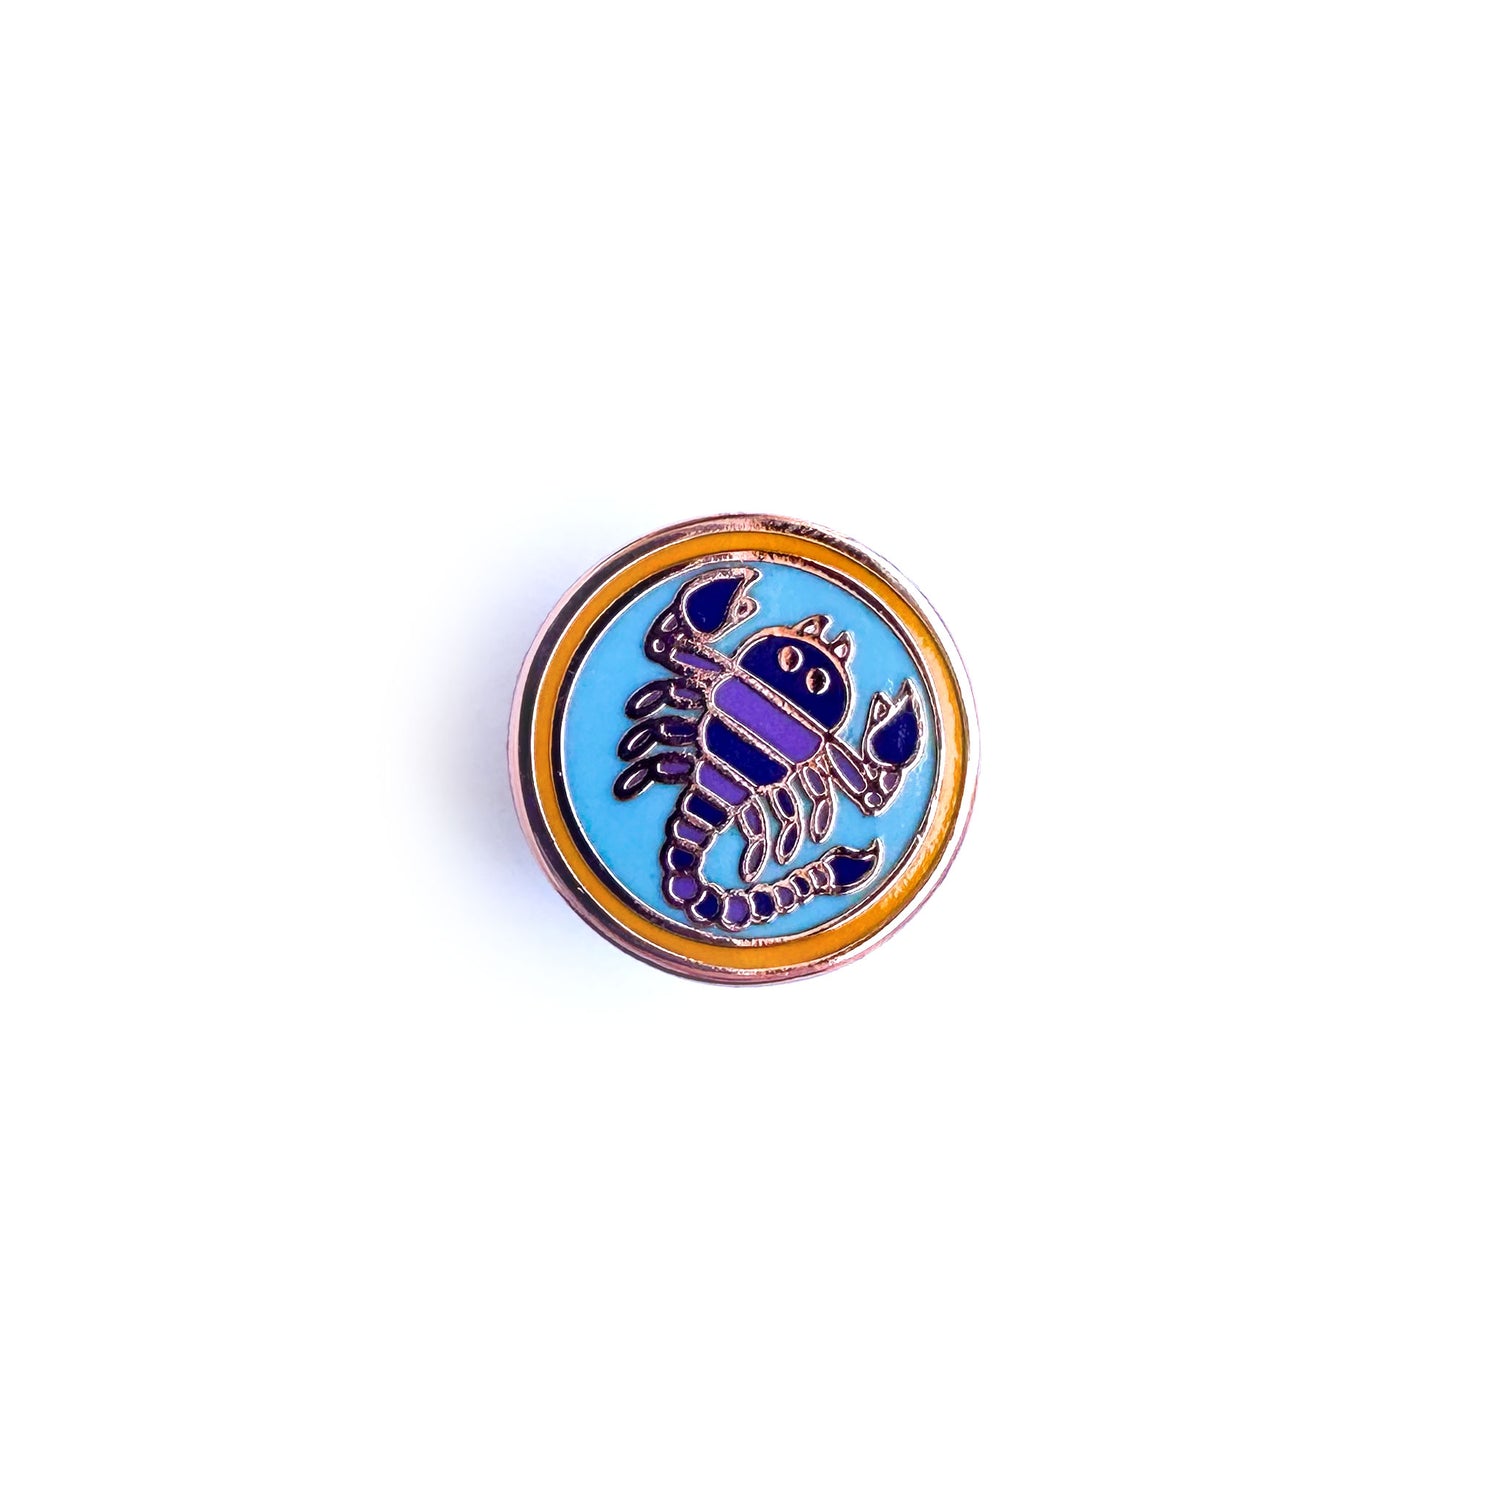 A circle enamel pin with a scorpion in a blue circle inside an orange circle meant to symbolize the Scorpio zodiac sign. 